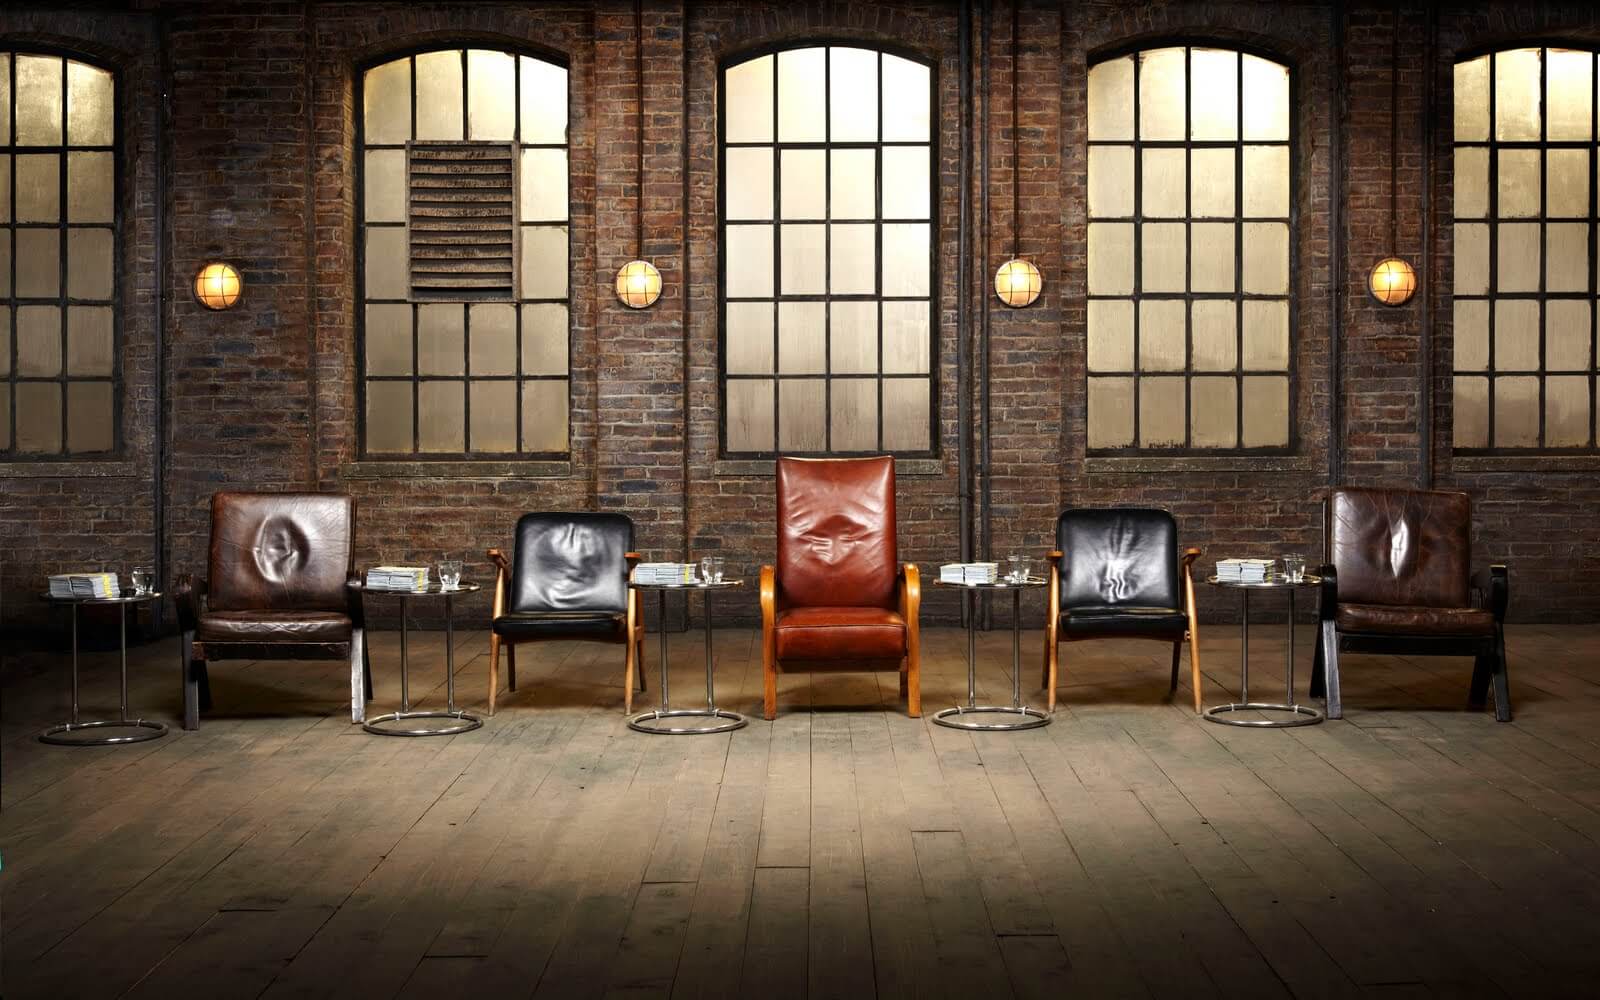 Image of five empty chairs, simulating the Dragon